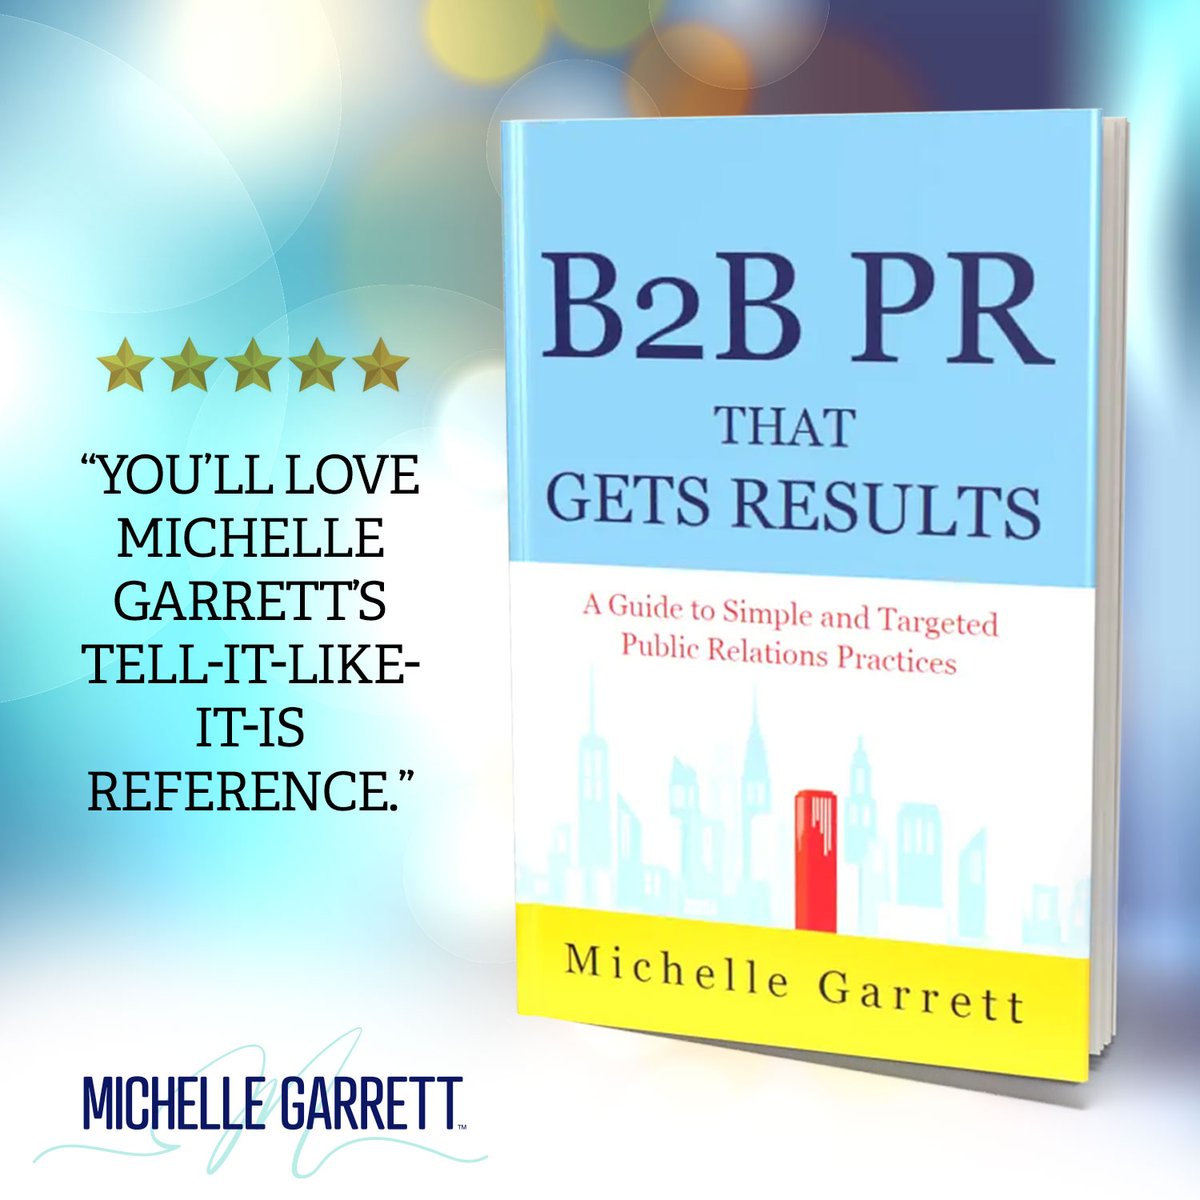 There's nothing more exciting as an author to hear this kind of feedback about your book: 'I have just started B2B PR That Gets Results and finding it brilliant - thank you for writing it!' #B2BPRThatGetsResults